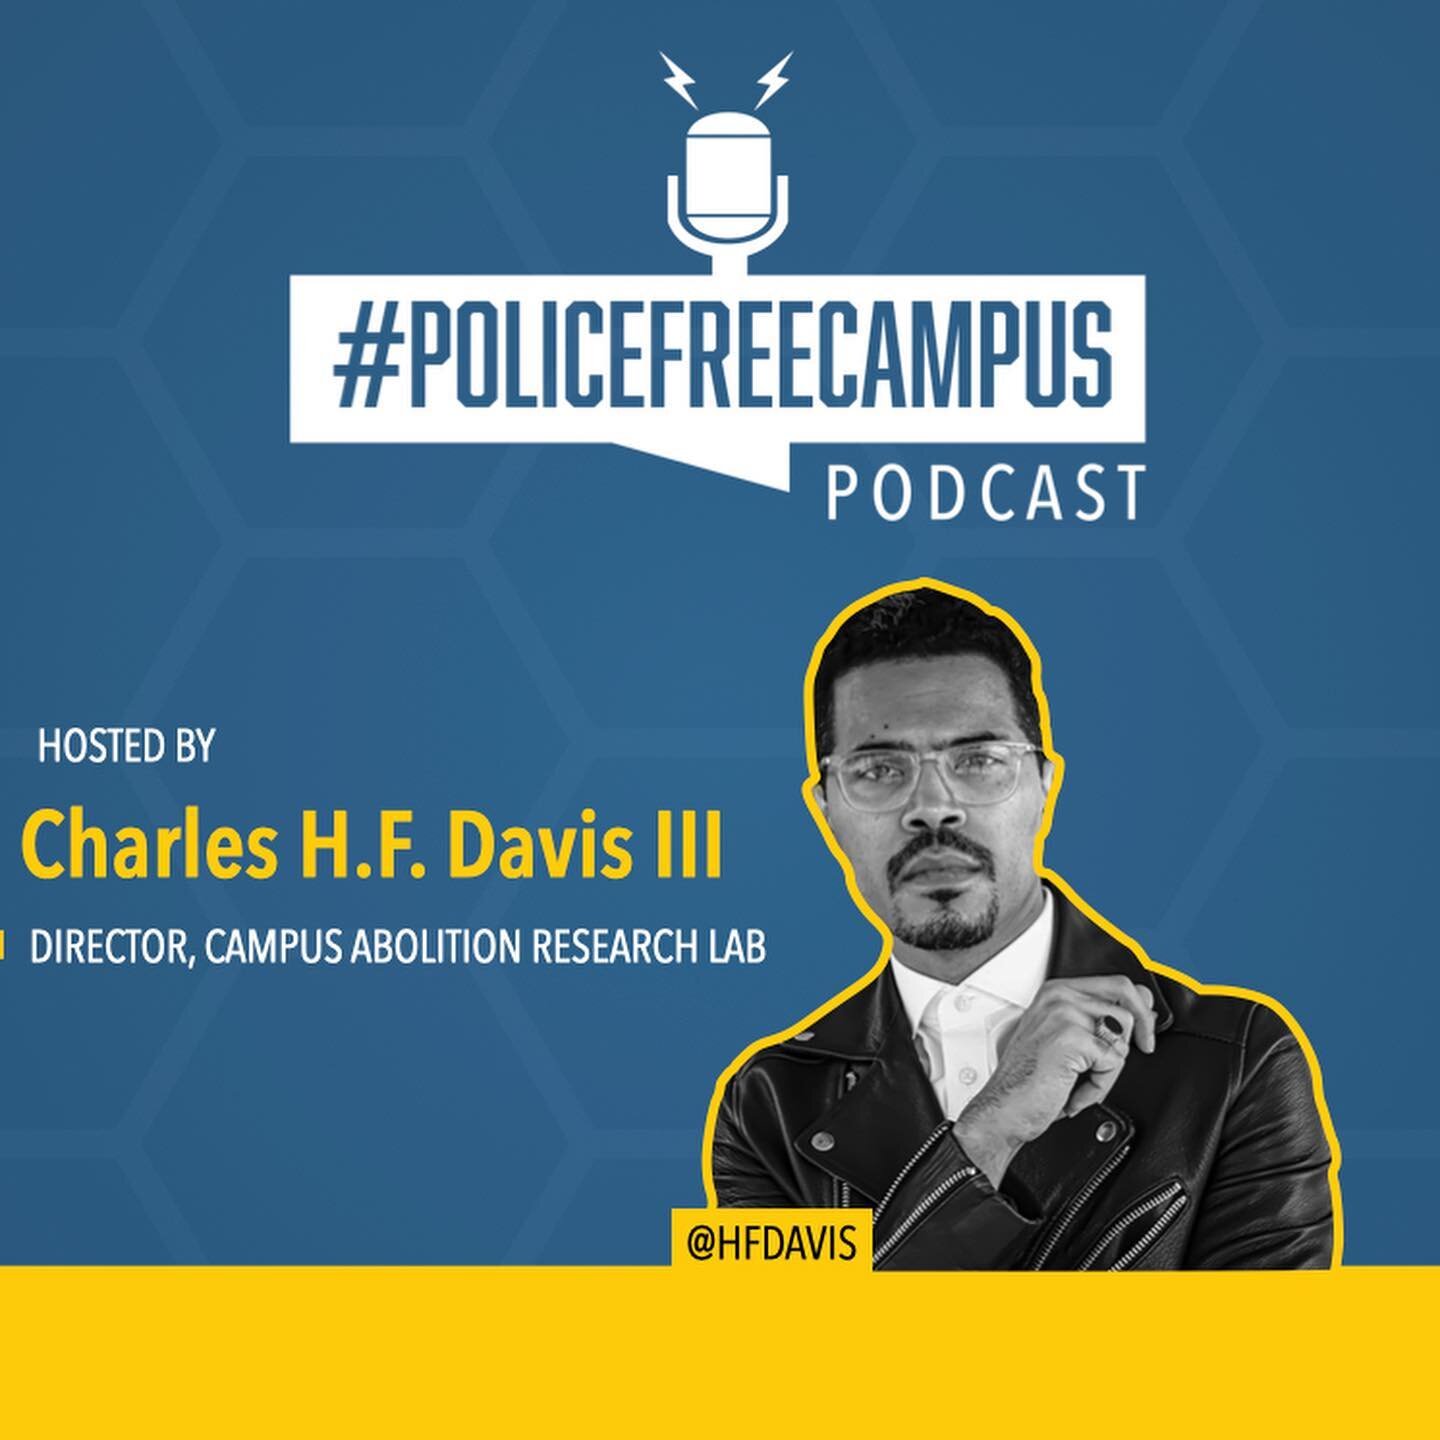 Welcome to the #PoliceFreeCampus Podcast!

This series brings together comrades and colleagues working to reimagine colleges, universities, and a world without police.

Building on the work initiated by the @S4BLCollective , which introduced the #Pol